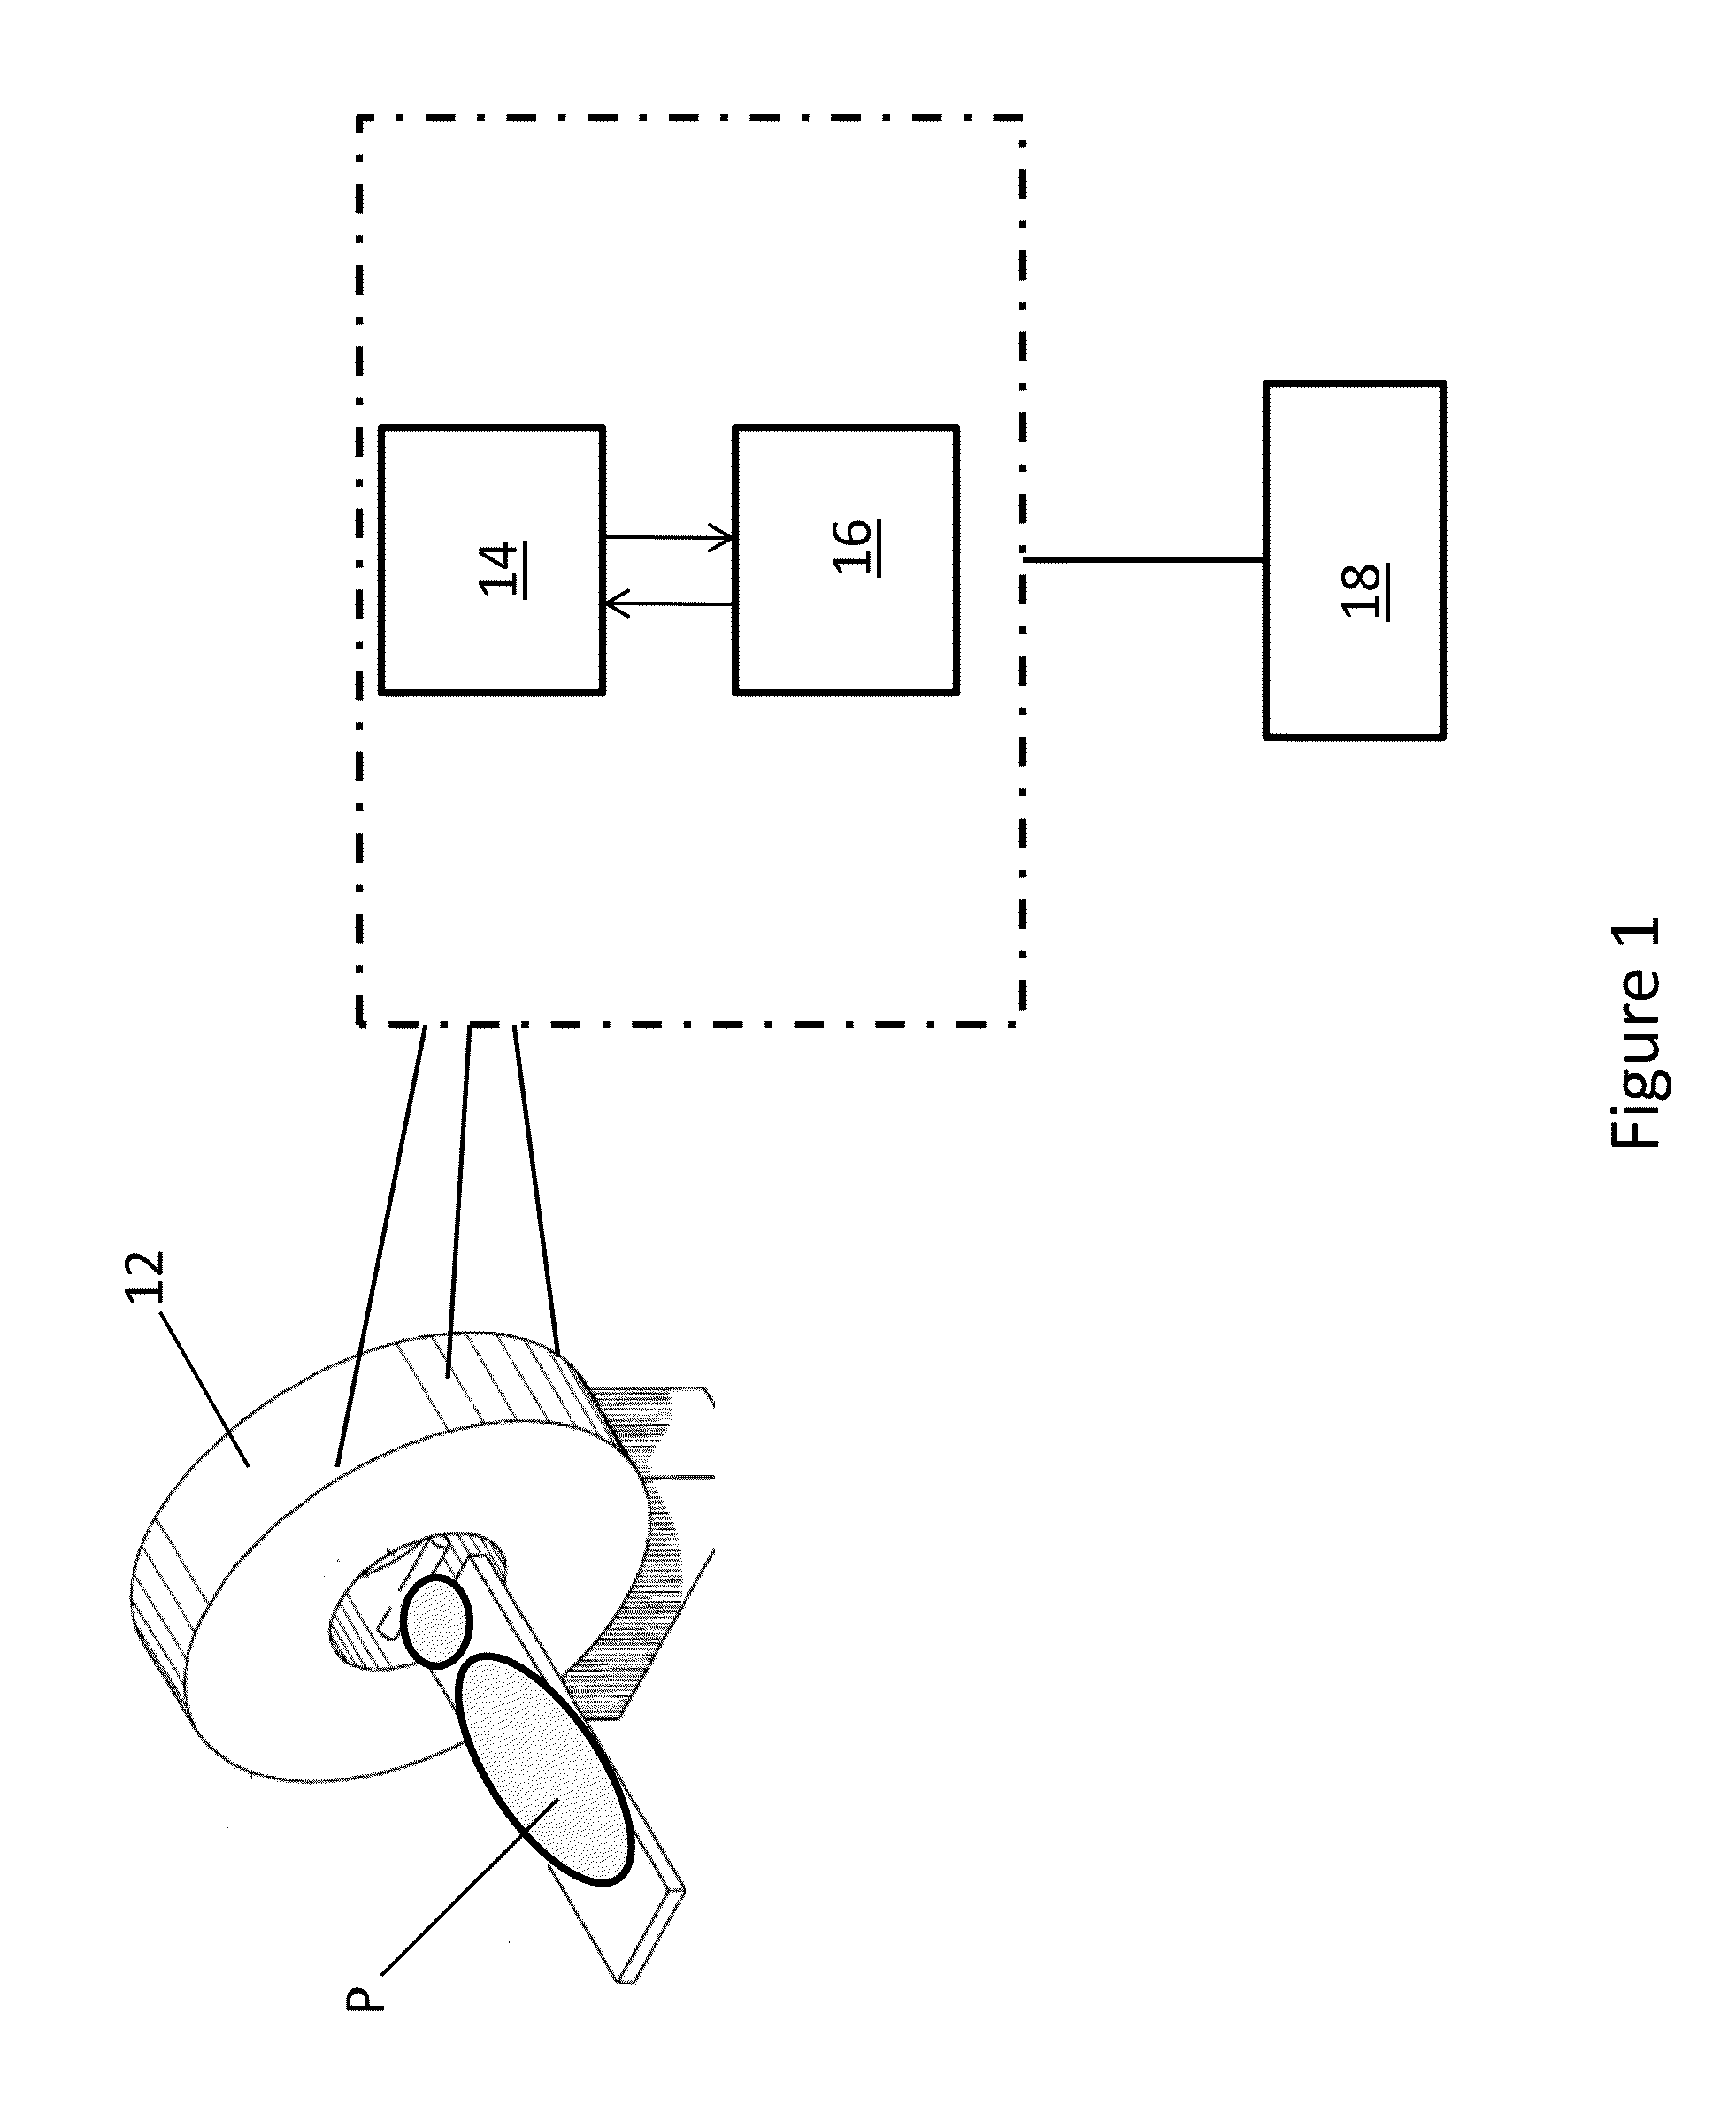 Method for creating attenuation correction maps for pet image reconstruction